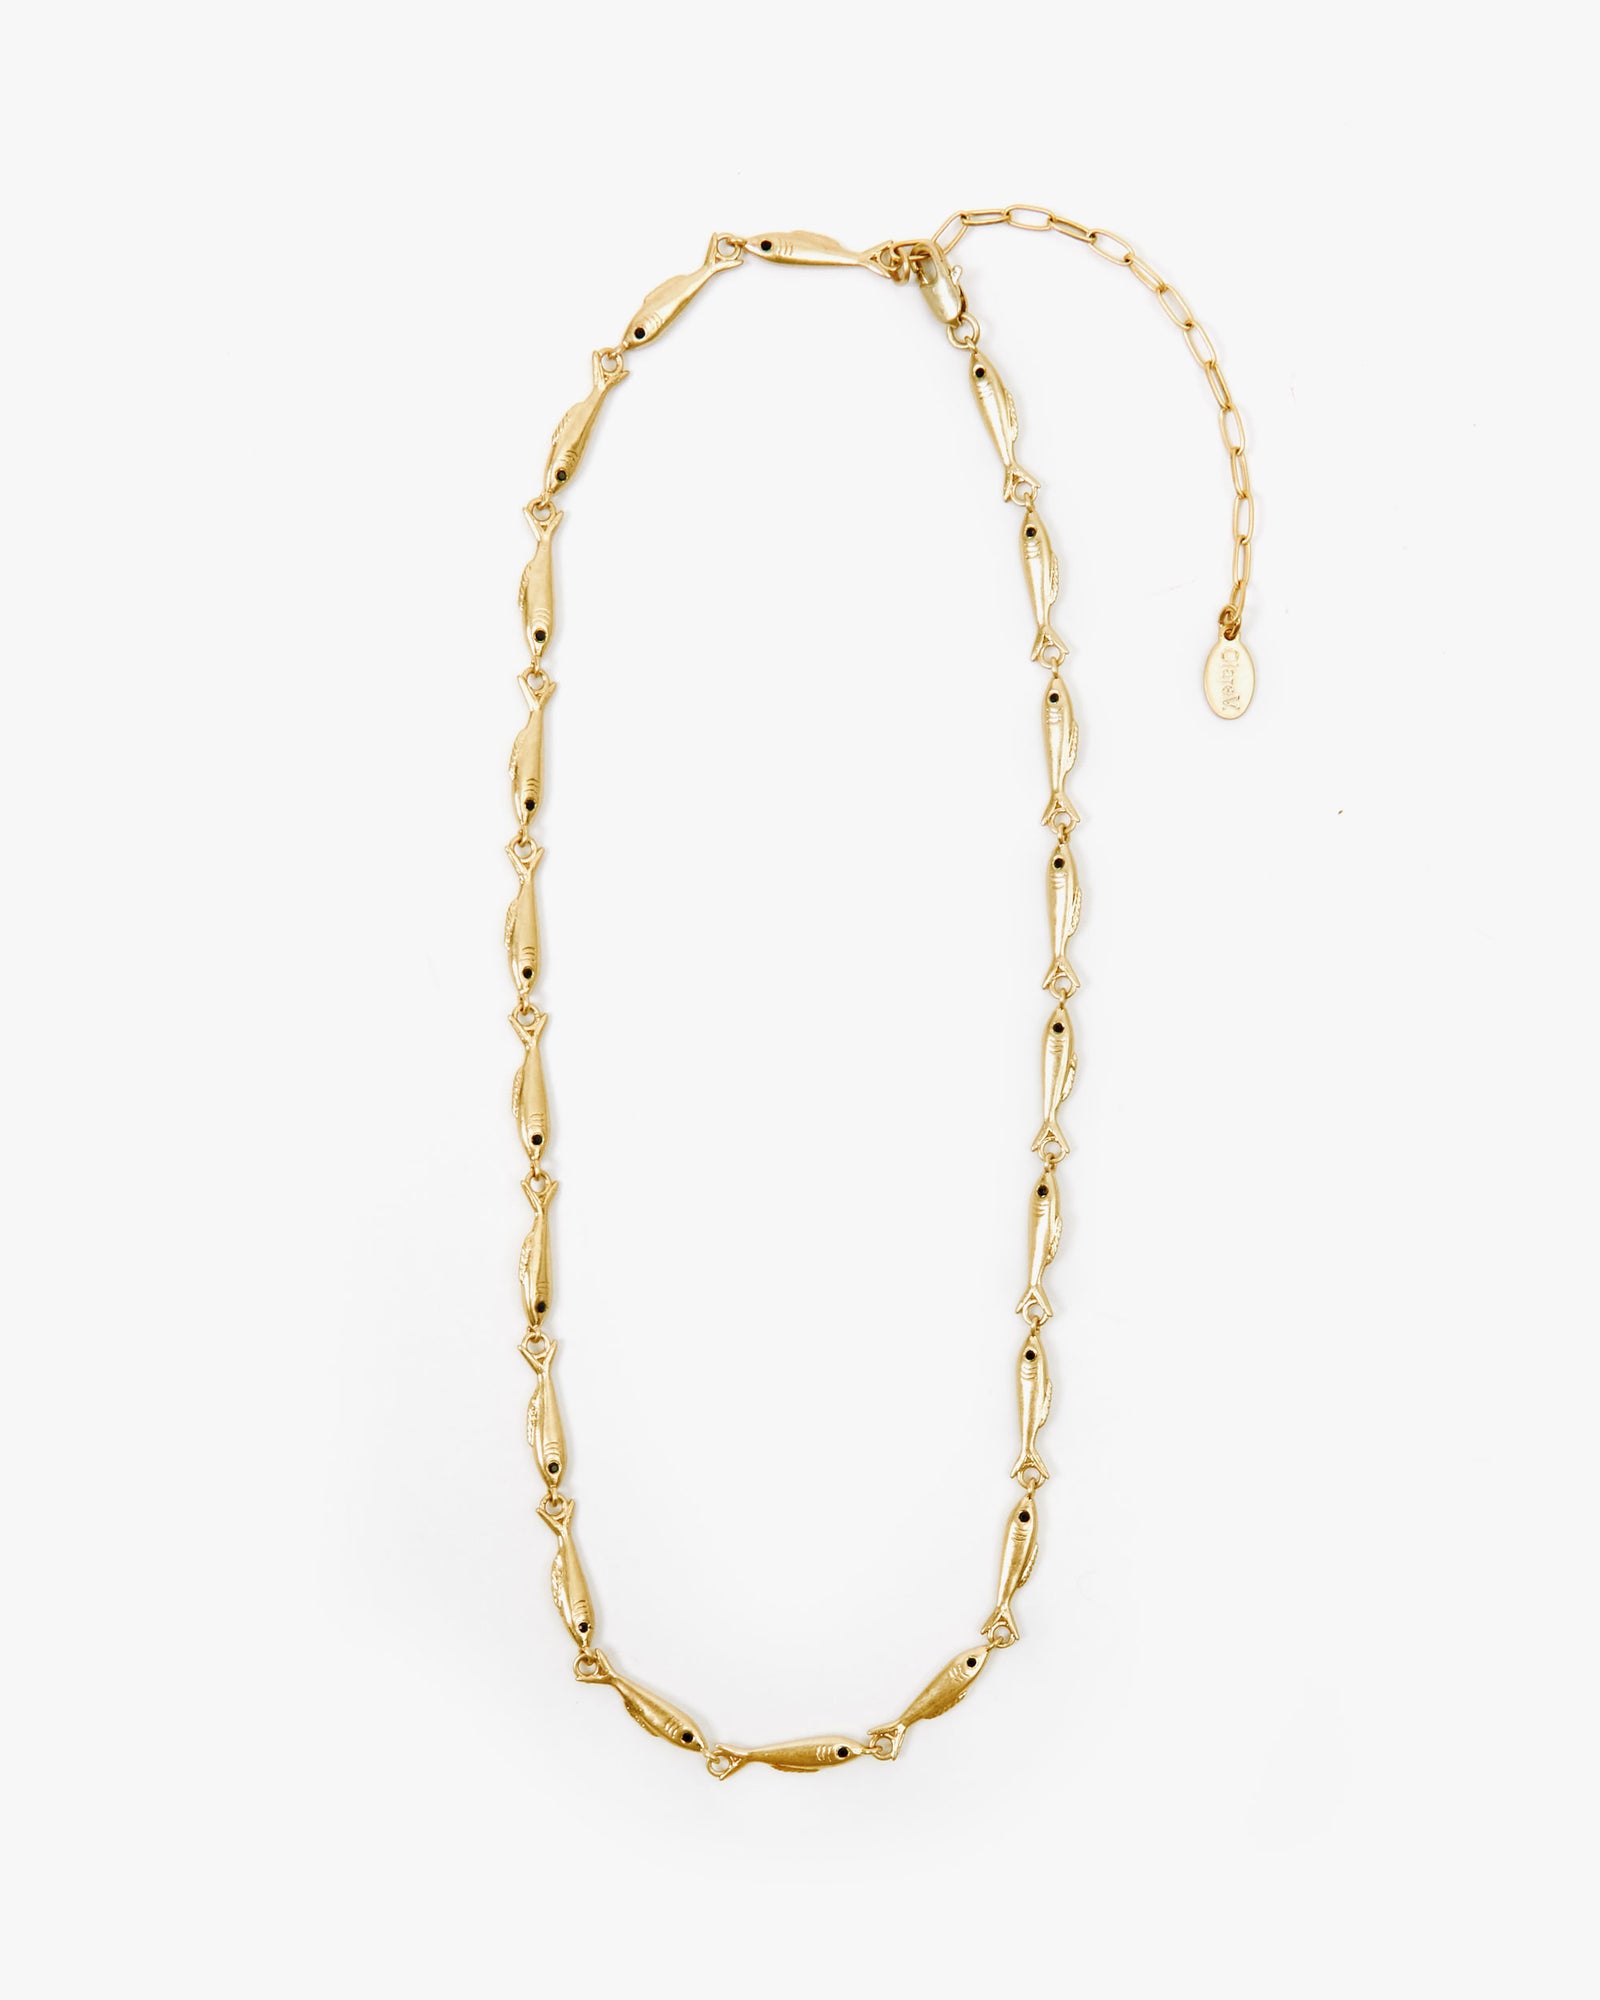 flat image of the vintage gold Sardine Chain Necklace, showing the 3 inch extender